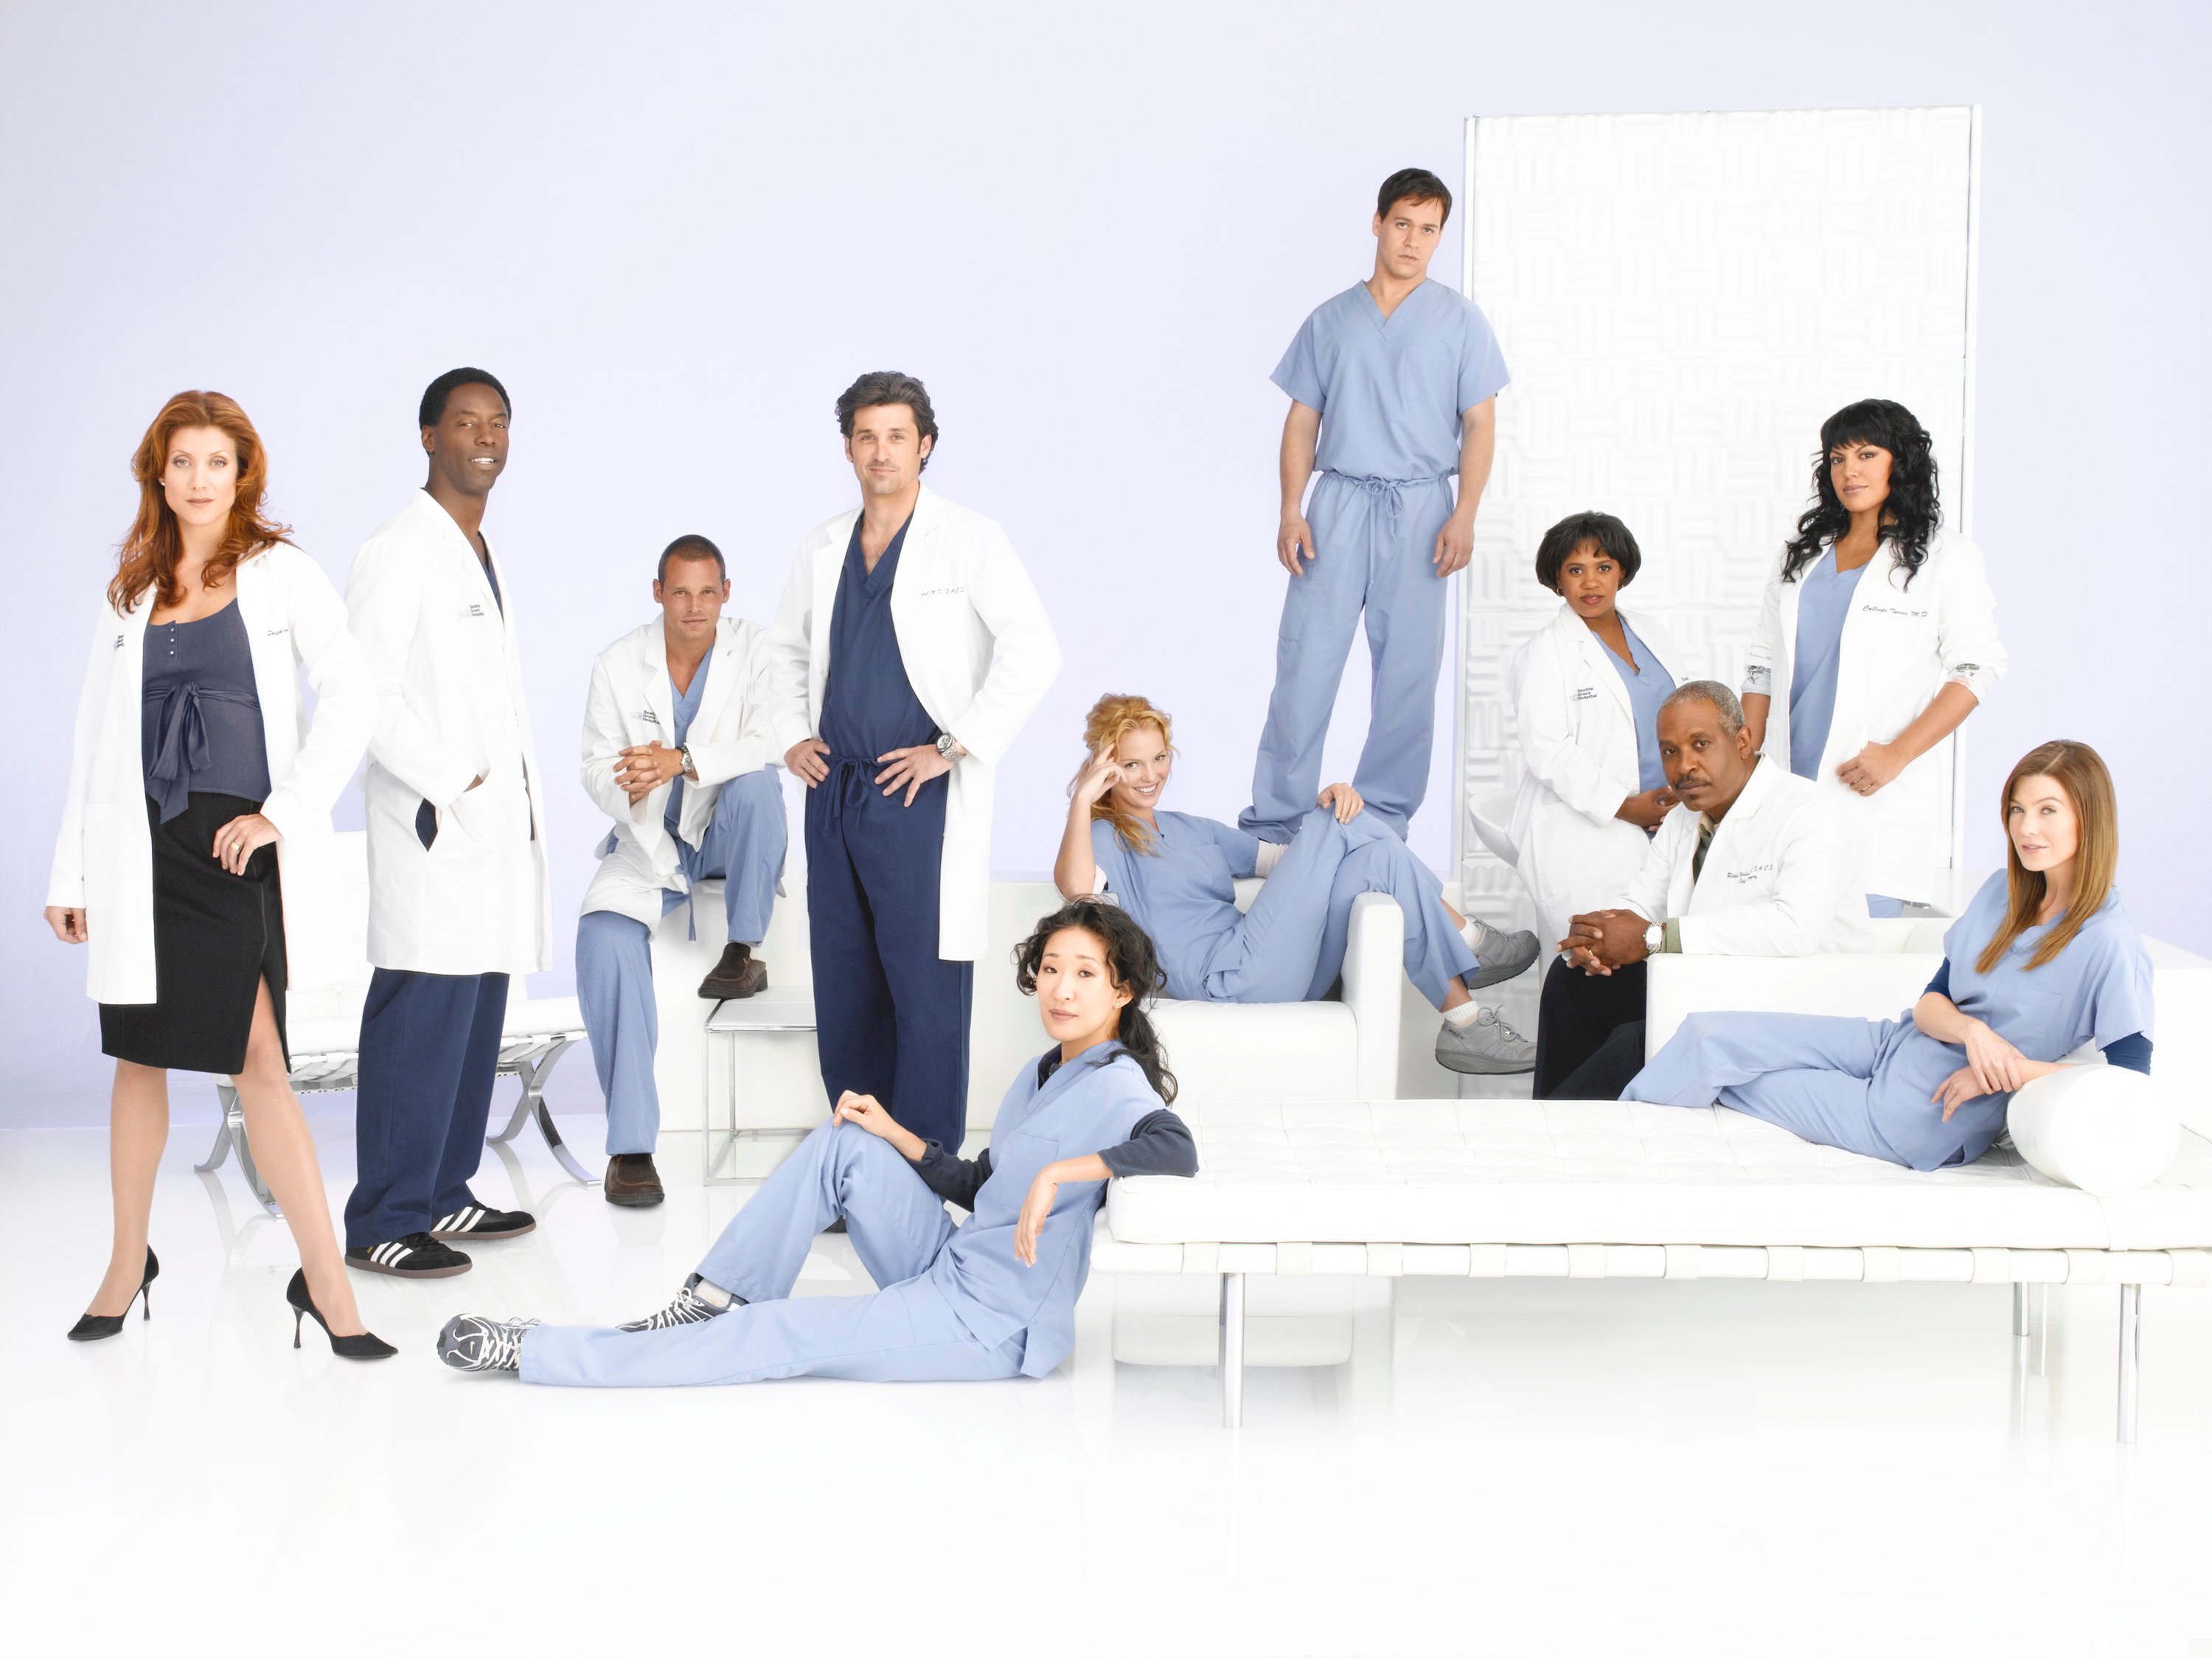 'Grey's Anatomy' cast members smile and pose for the camera in their medical scrubs for a promotional photo